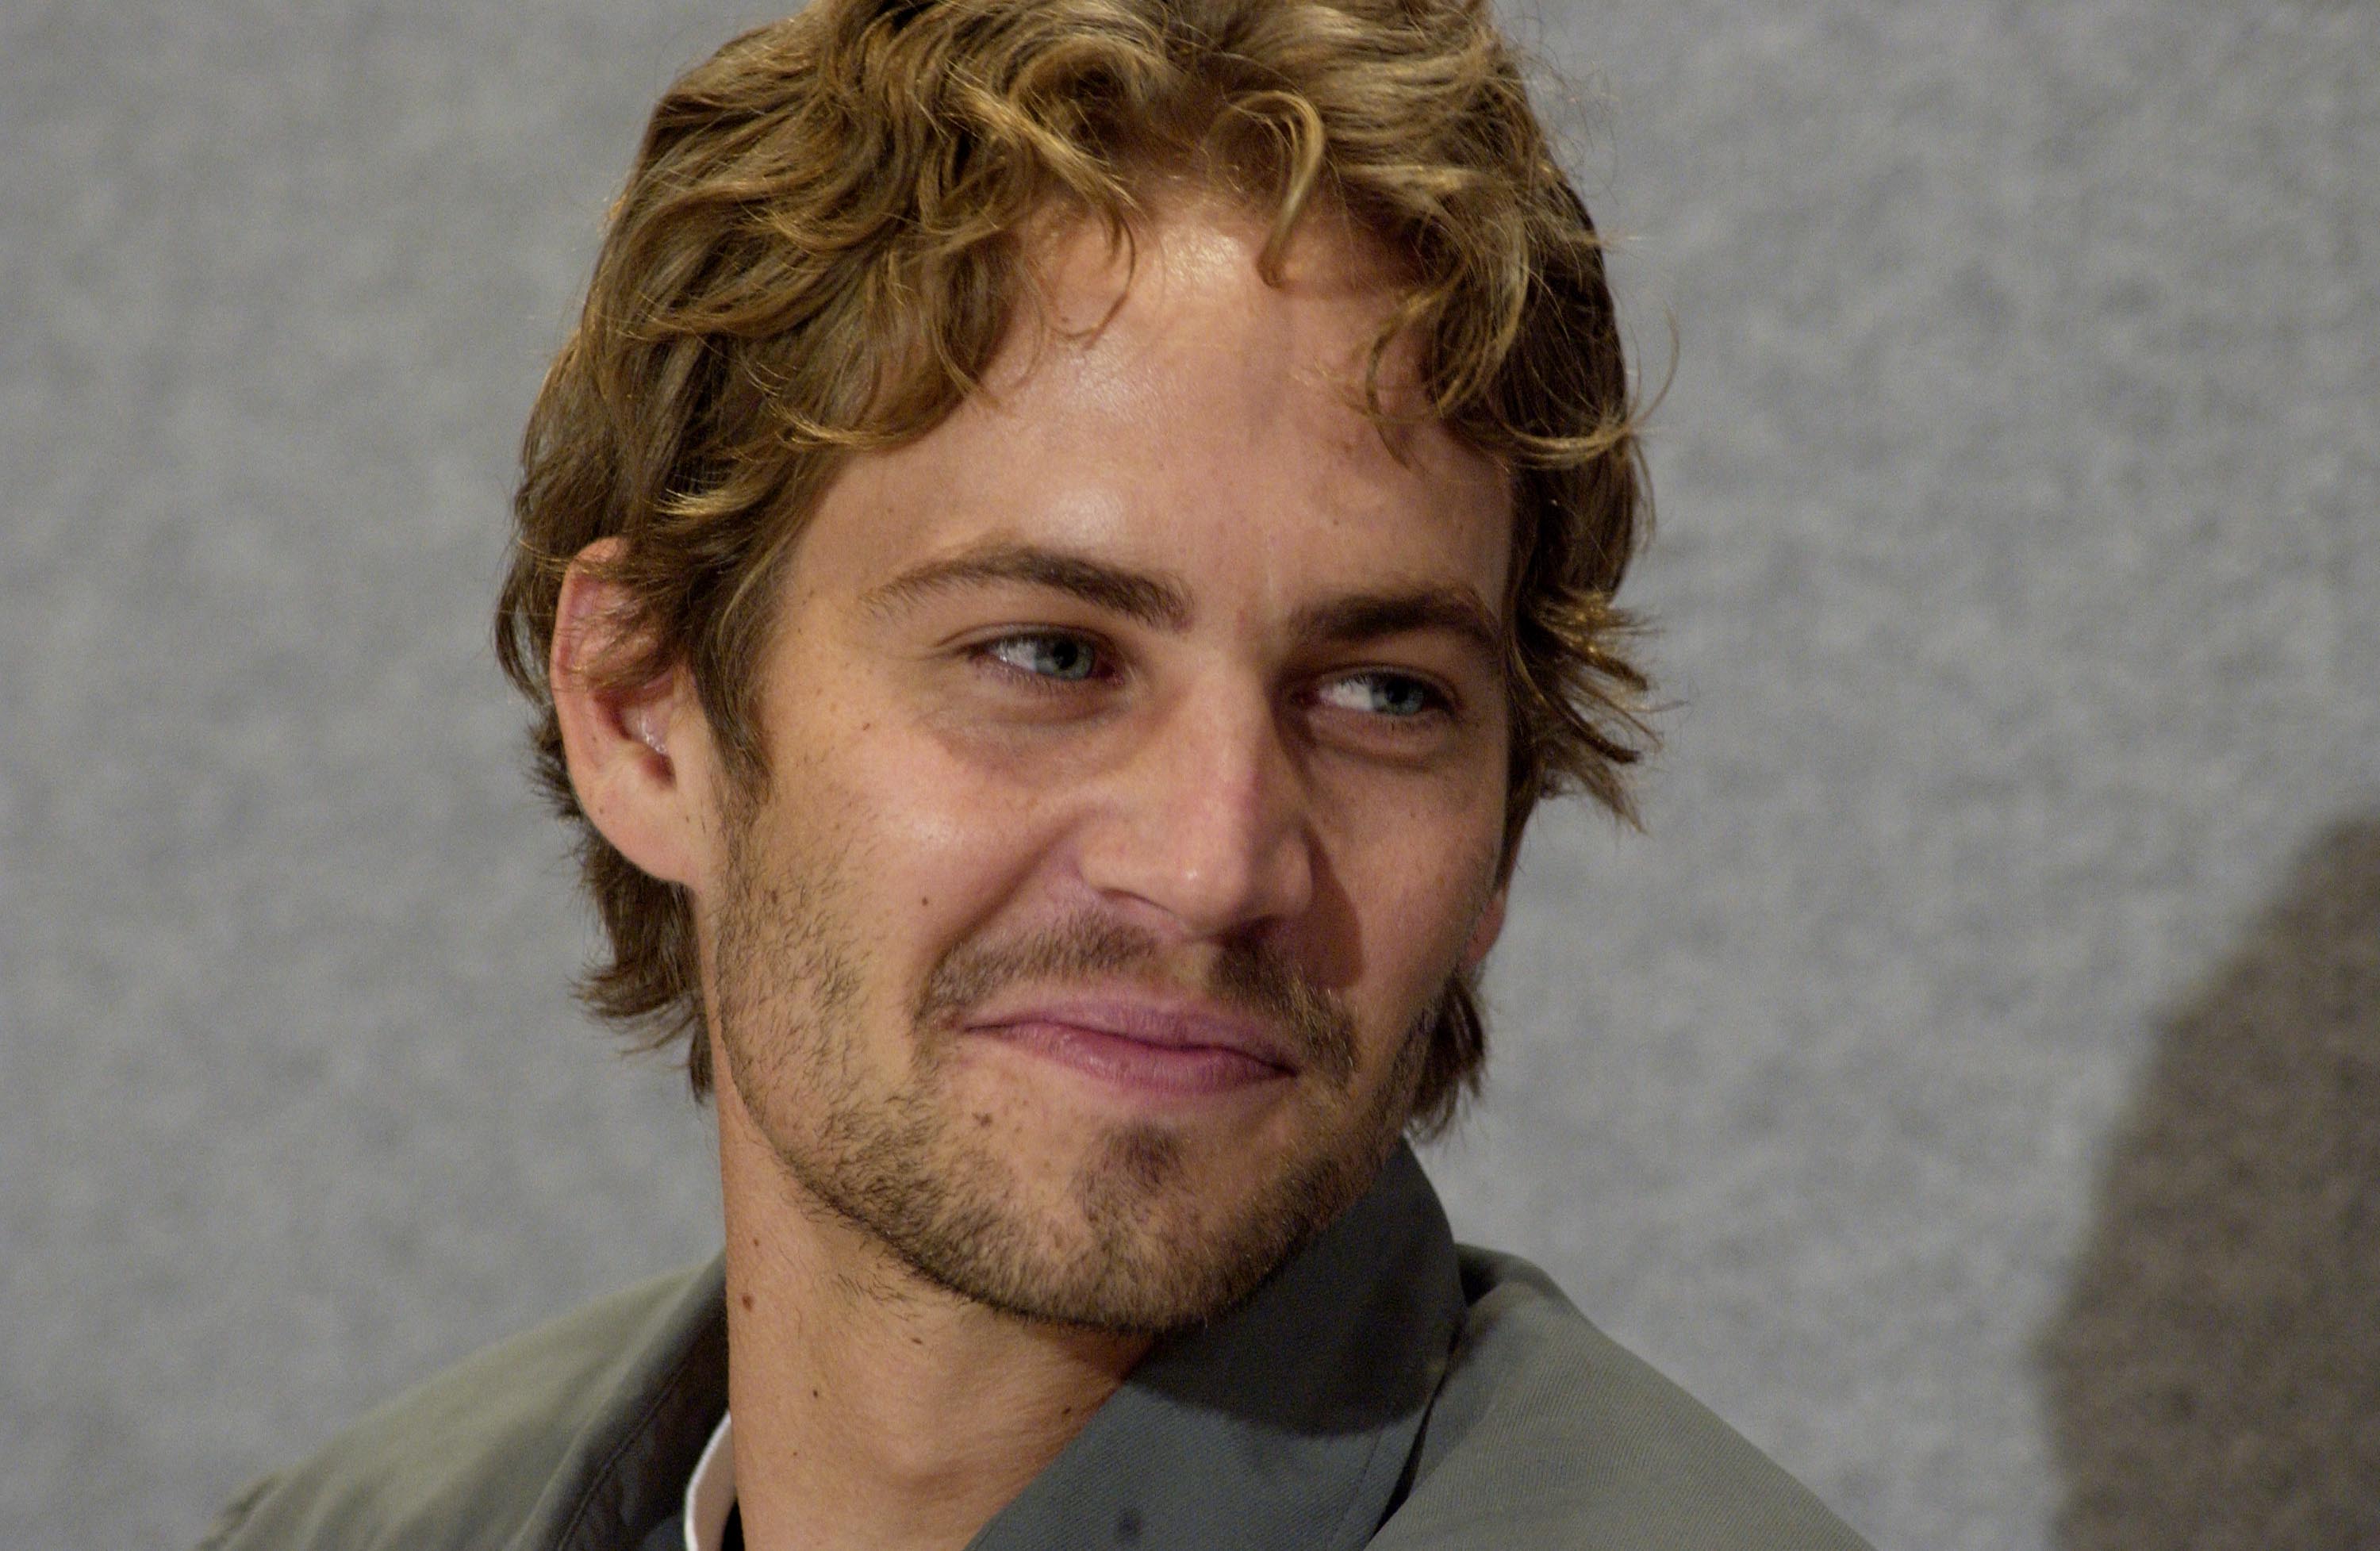 Paul Walker during Toronto 2001 - Joy Ride Press Conference at Press Conference on September 9, 2001 in Toronto, Canada. | Source: Getty Images